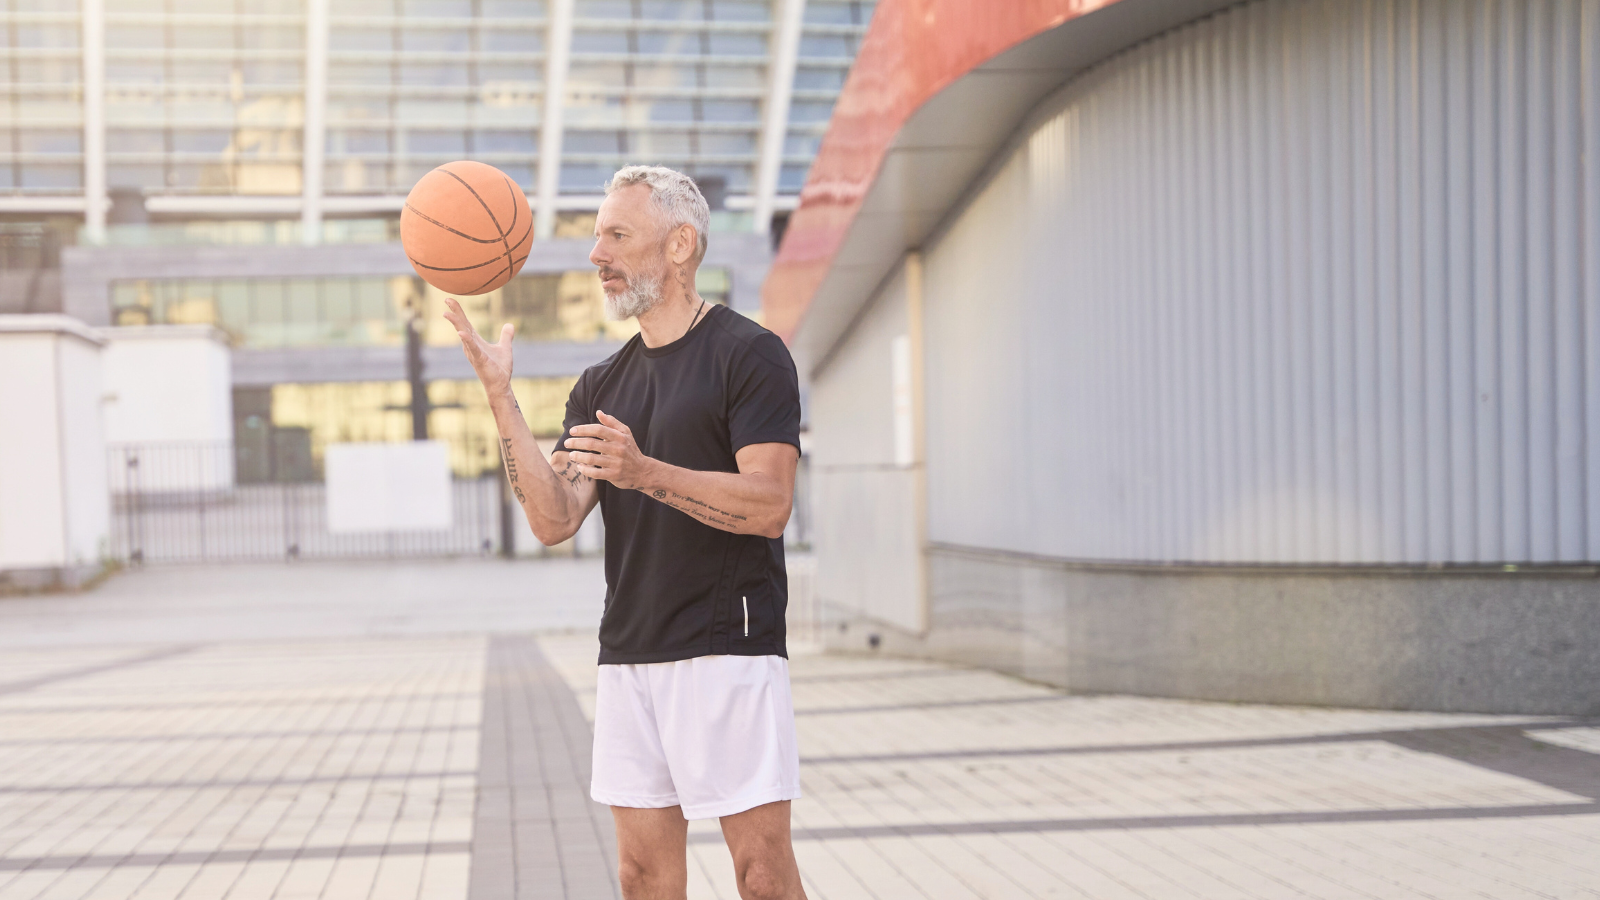 10 Ways to Avoid Sports Injuries Over 50